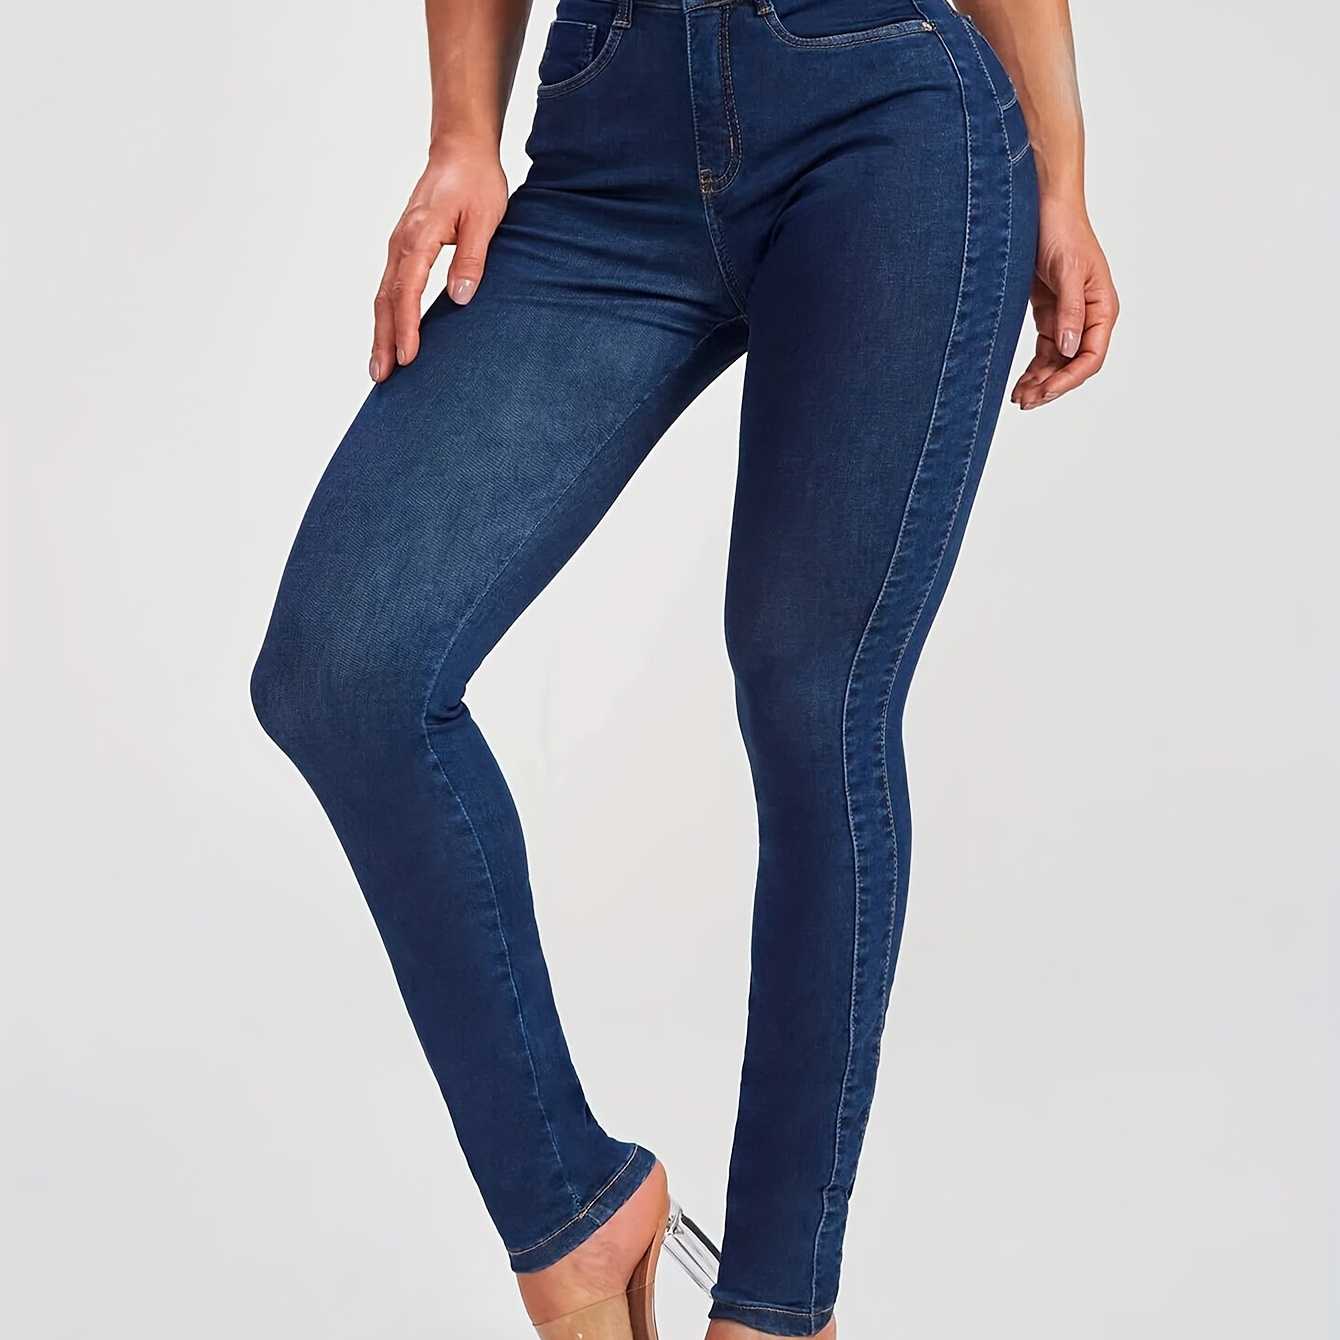 

Women's High Waist Stretchy Skinny Leg Jeans, Solid Butt Lifting Denim Pants, Classic Side Patchwork Jeans